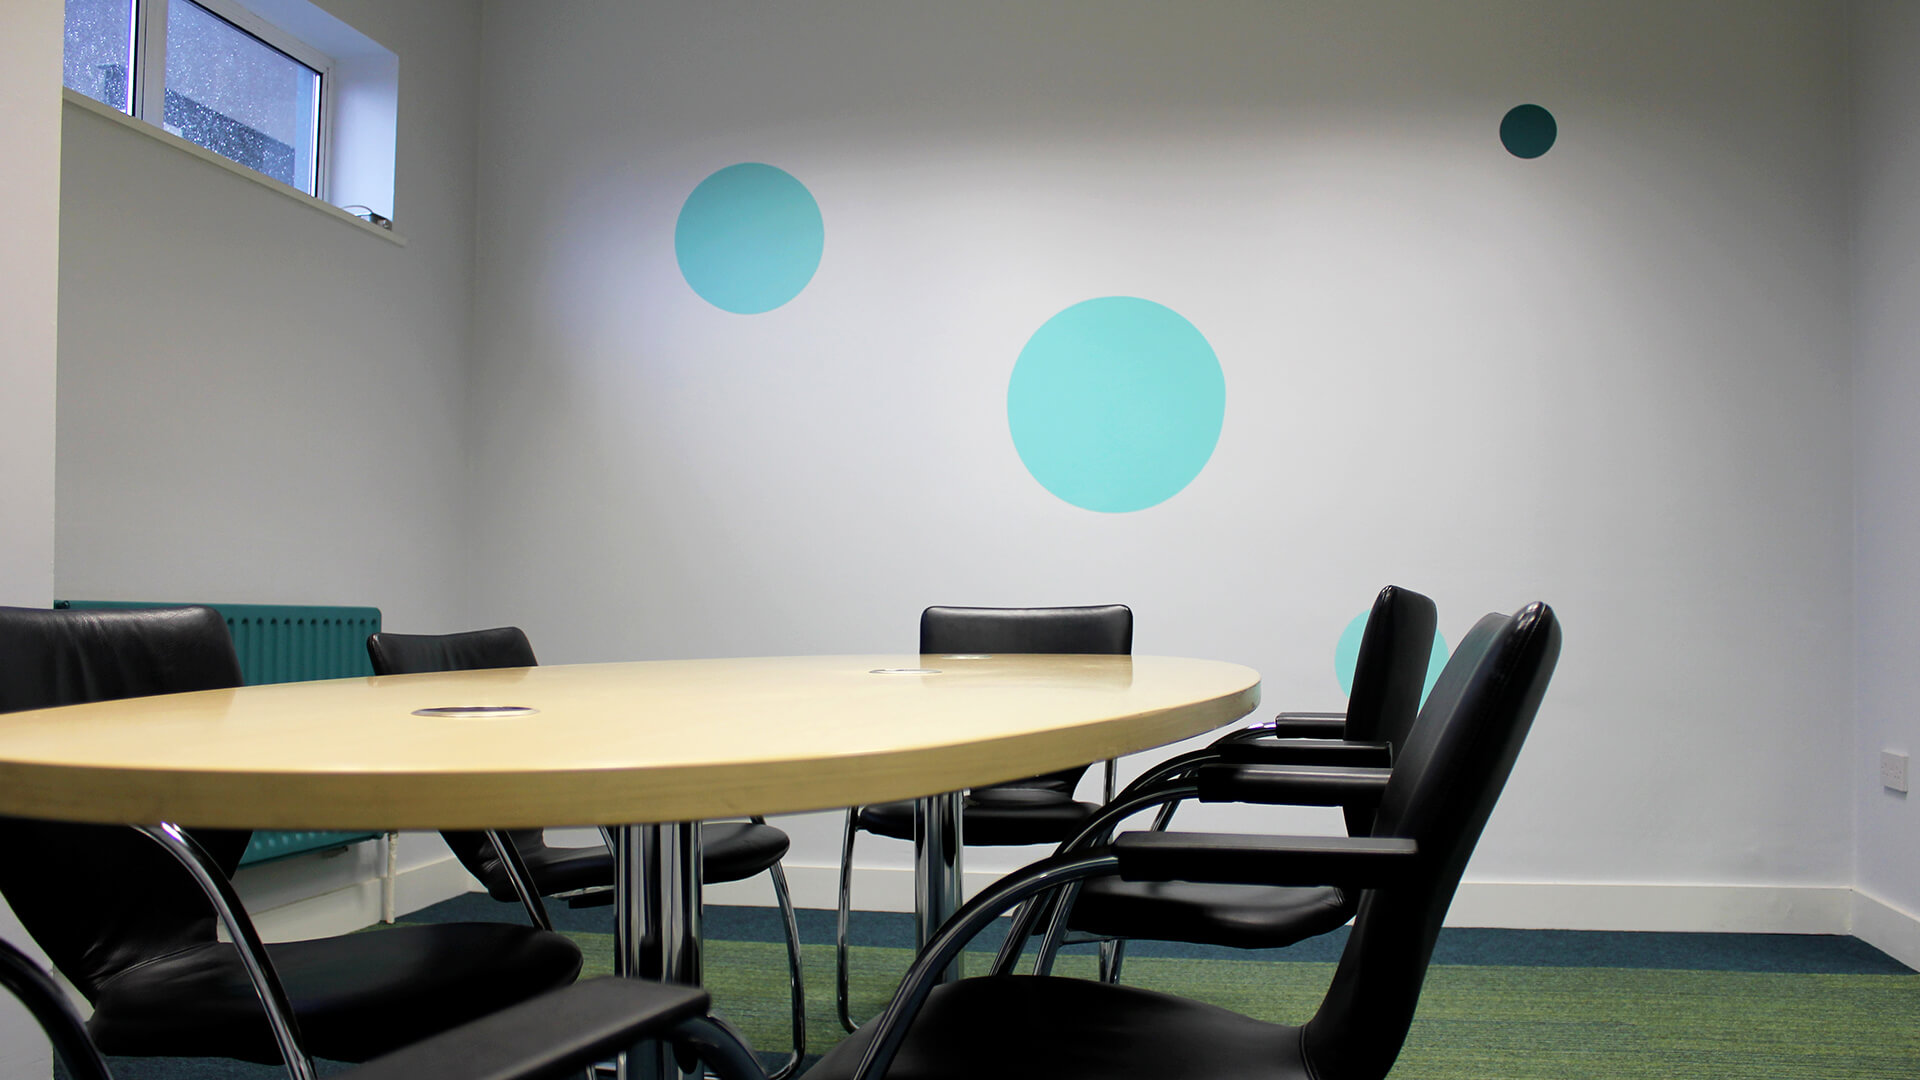 An interior meeting room in the OneFiveSeven building featuring an oval meeting table and modern circular decals on the walls